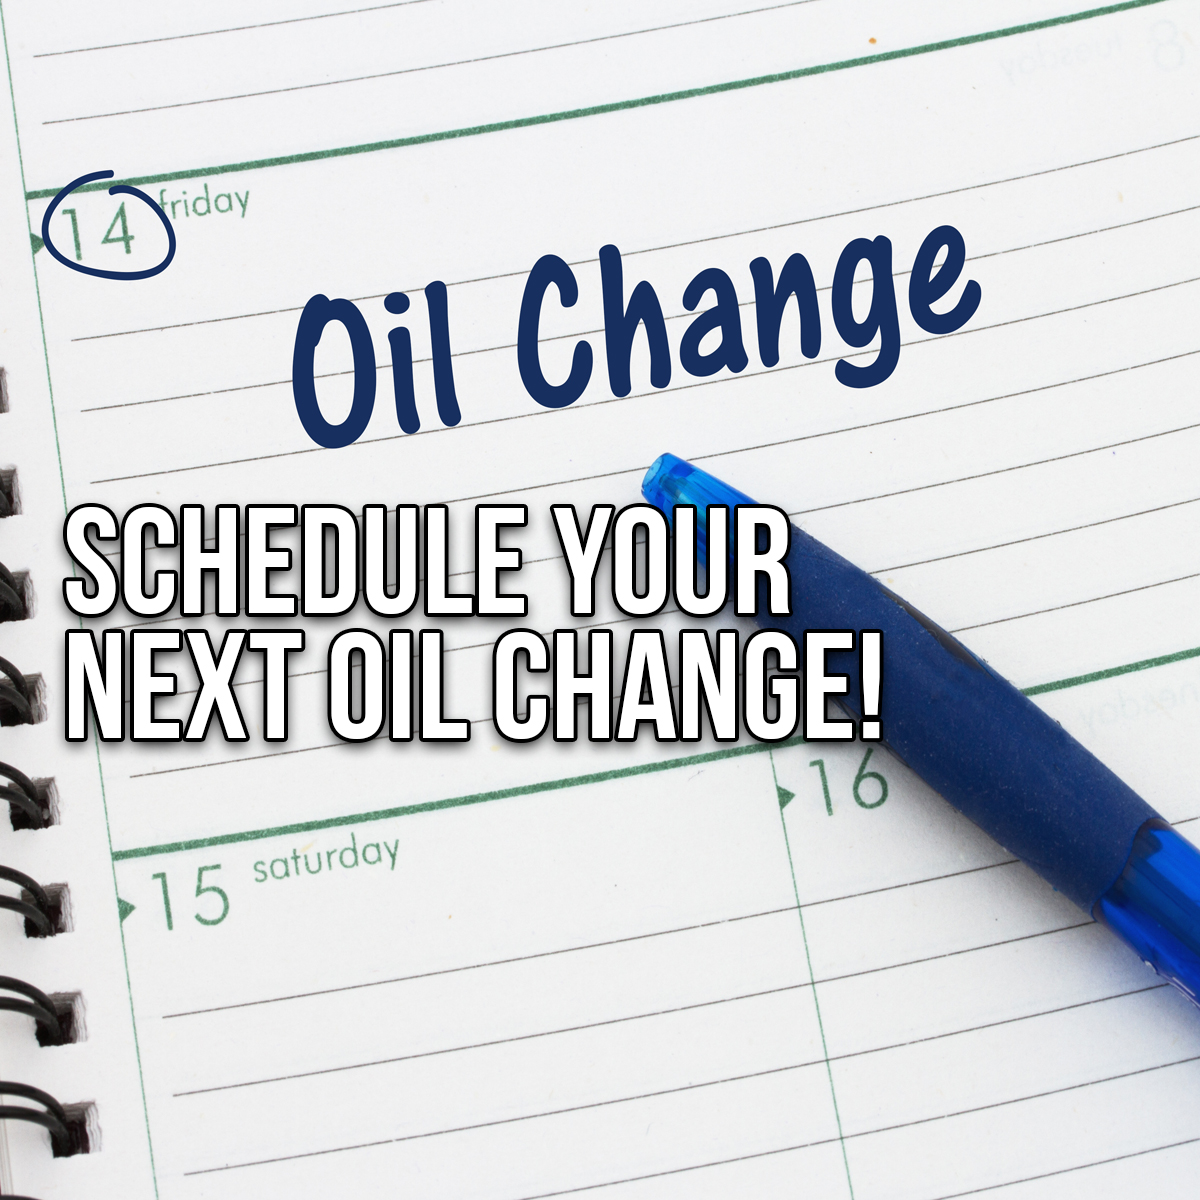 Give us a call to schedule your next oil change! Schedule today at (618) 797-6711.